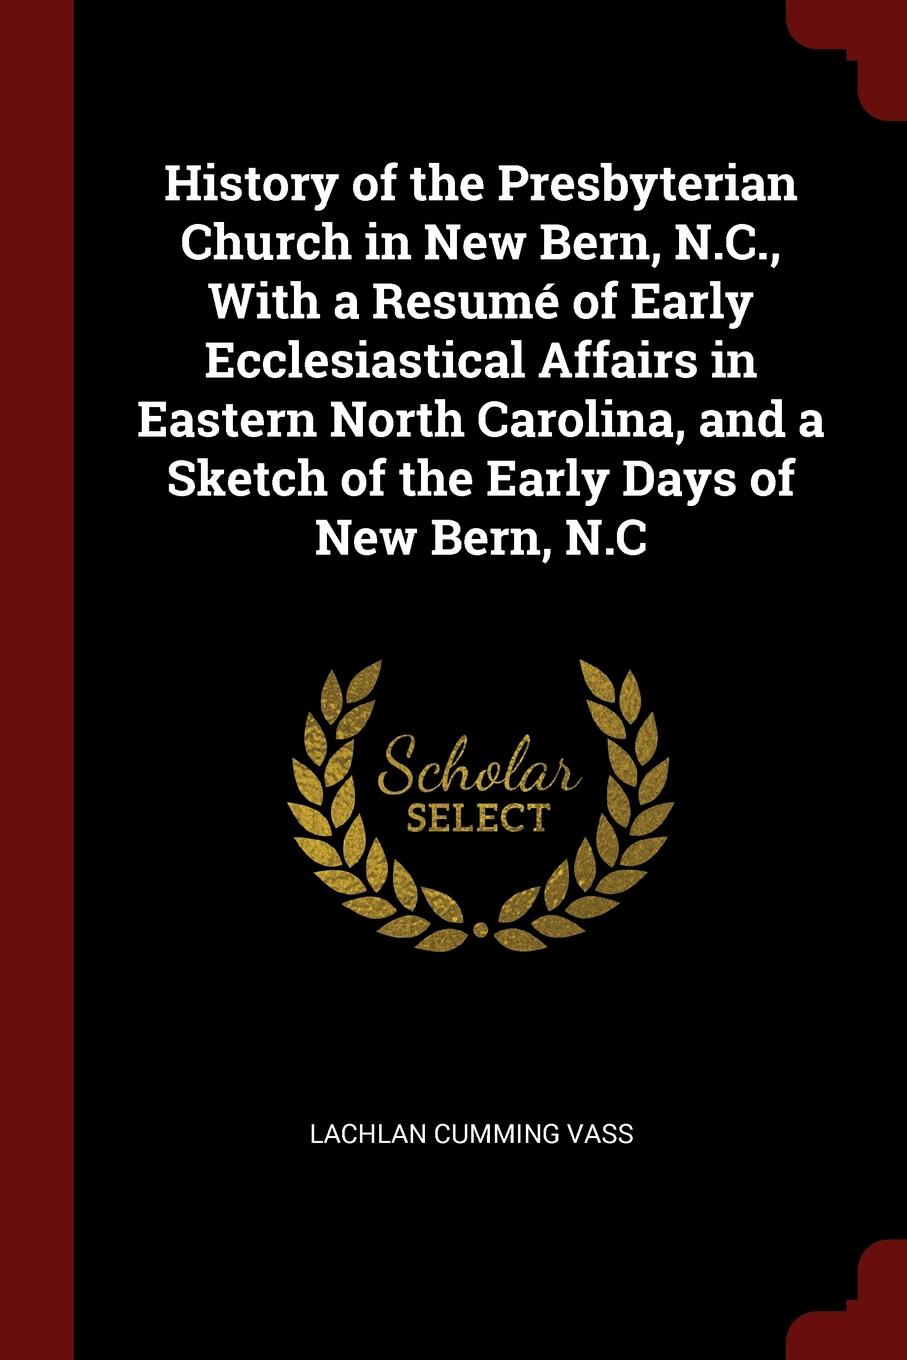 History of the Presbyterian Church in New Bern, N.C., With a Resume of Early Ecclesiastical Affairs in Eastern North Carolina, and a Sketch of the Early Days of New Bern, N.C